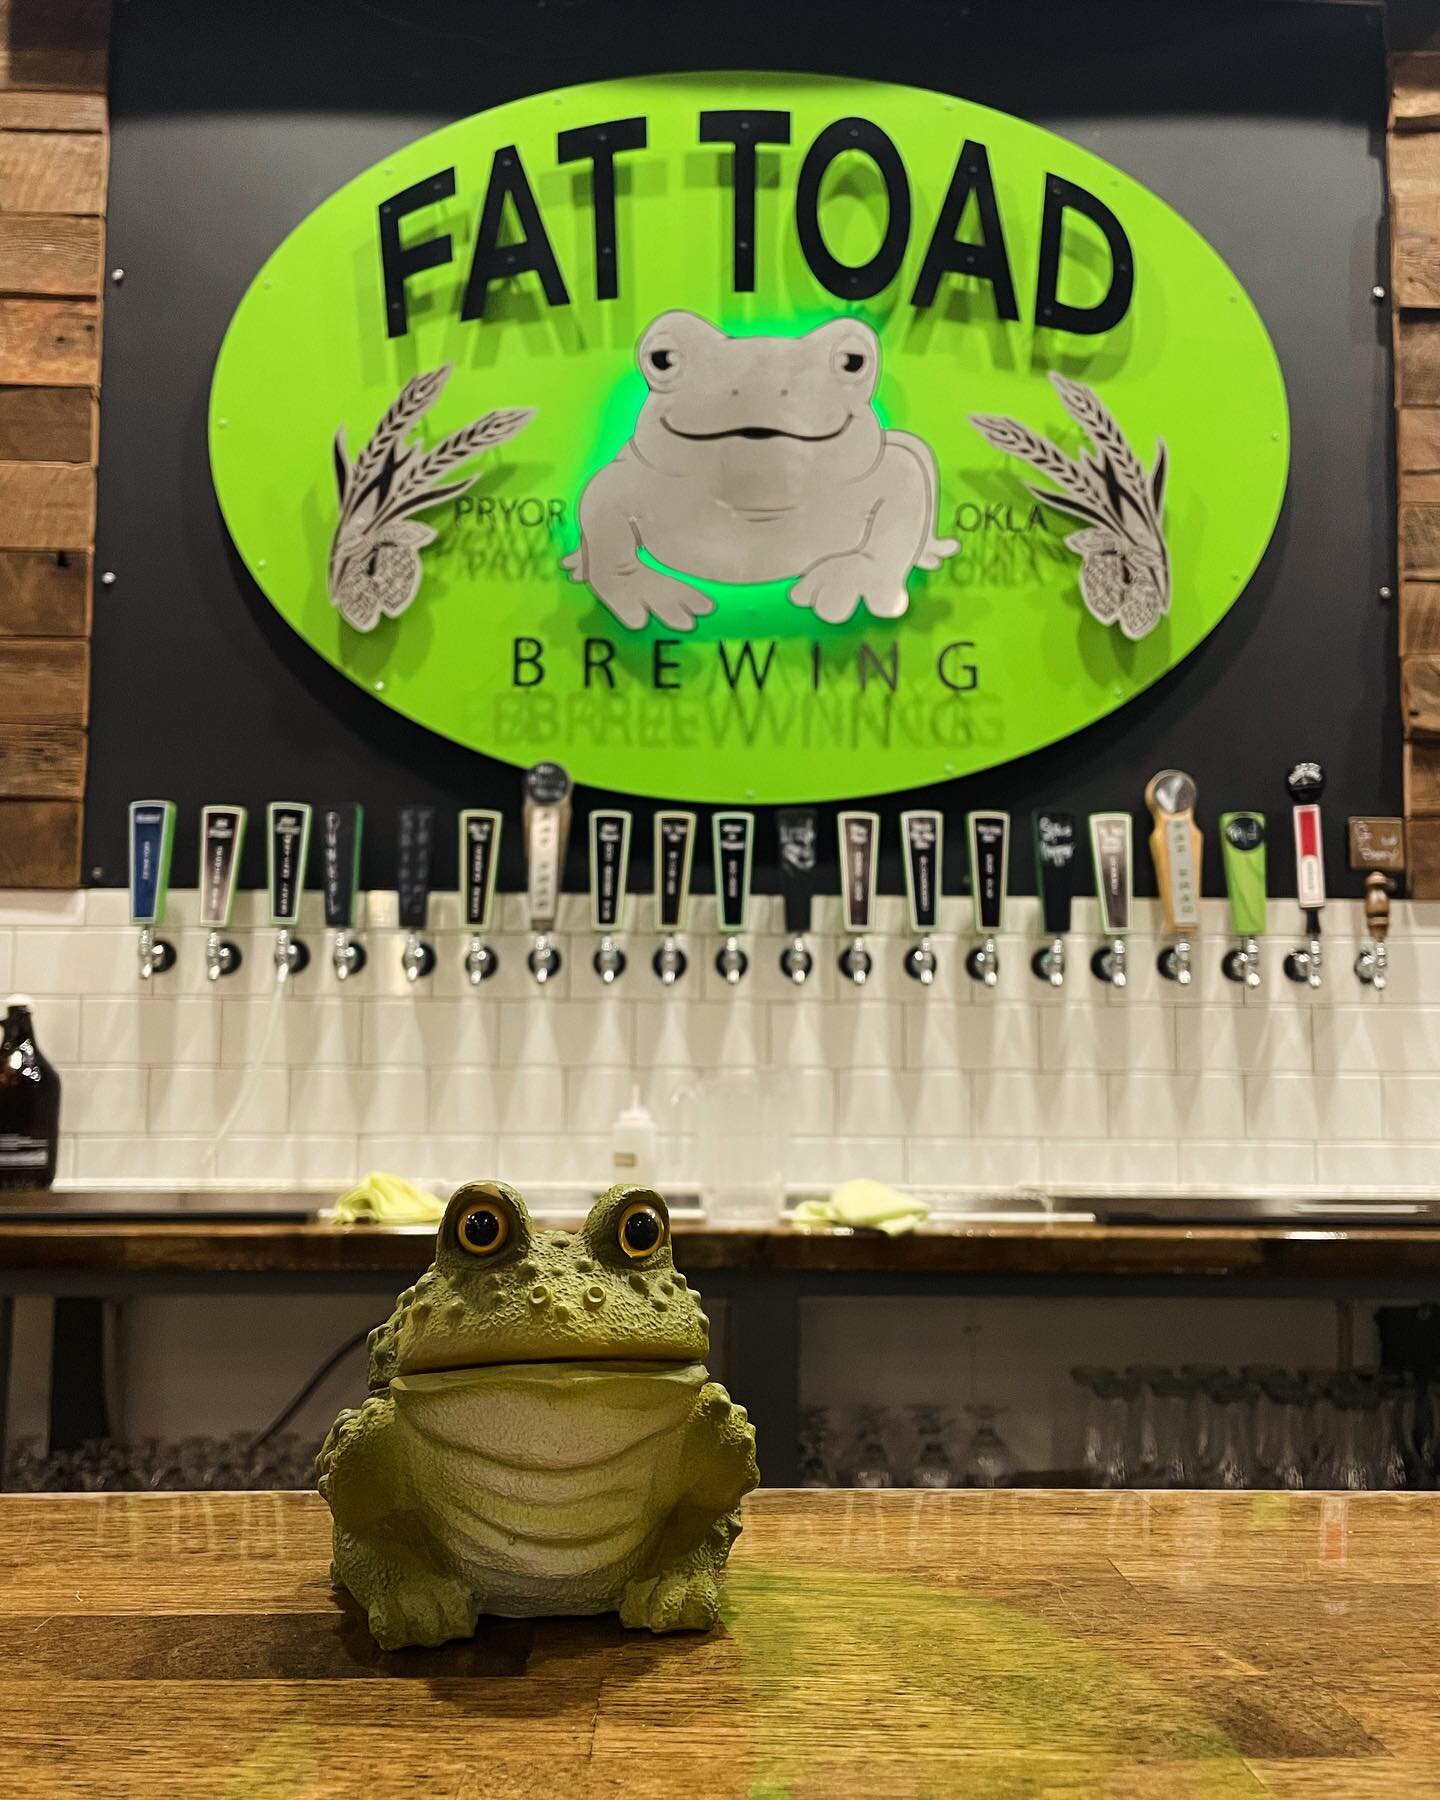 Question: When traveling, what do we always need do? 
Answer: Try the recommended local brewery 😍

🍻Thank you to @fattoadbrewing for the delicious beers, great food, and awesome service. We&rsquo;re already looking forward to our next time back in 